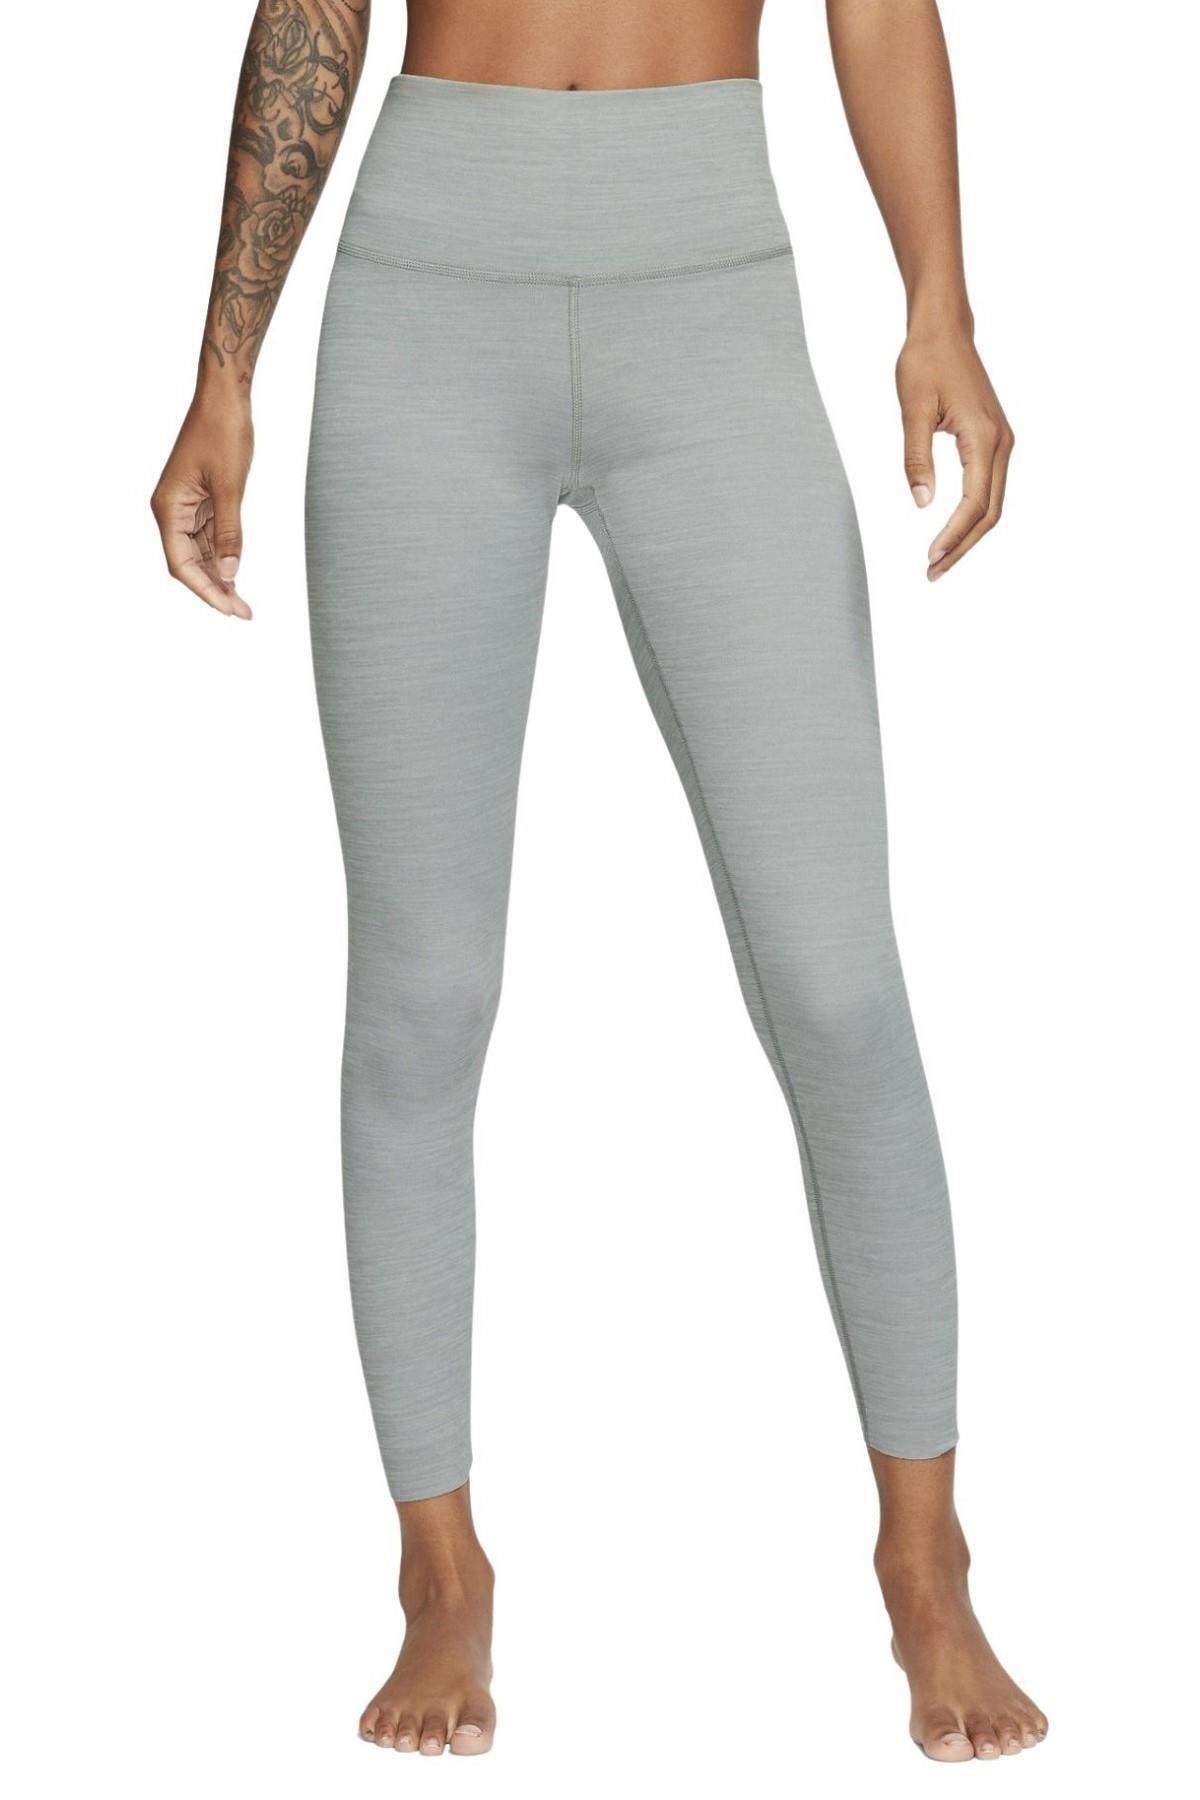 Nike Yoga Luxe Infinalon High Rise High Waisted 7/8 Size Gray Tights -  Trendyol